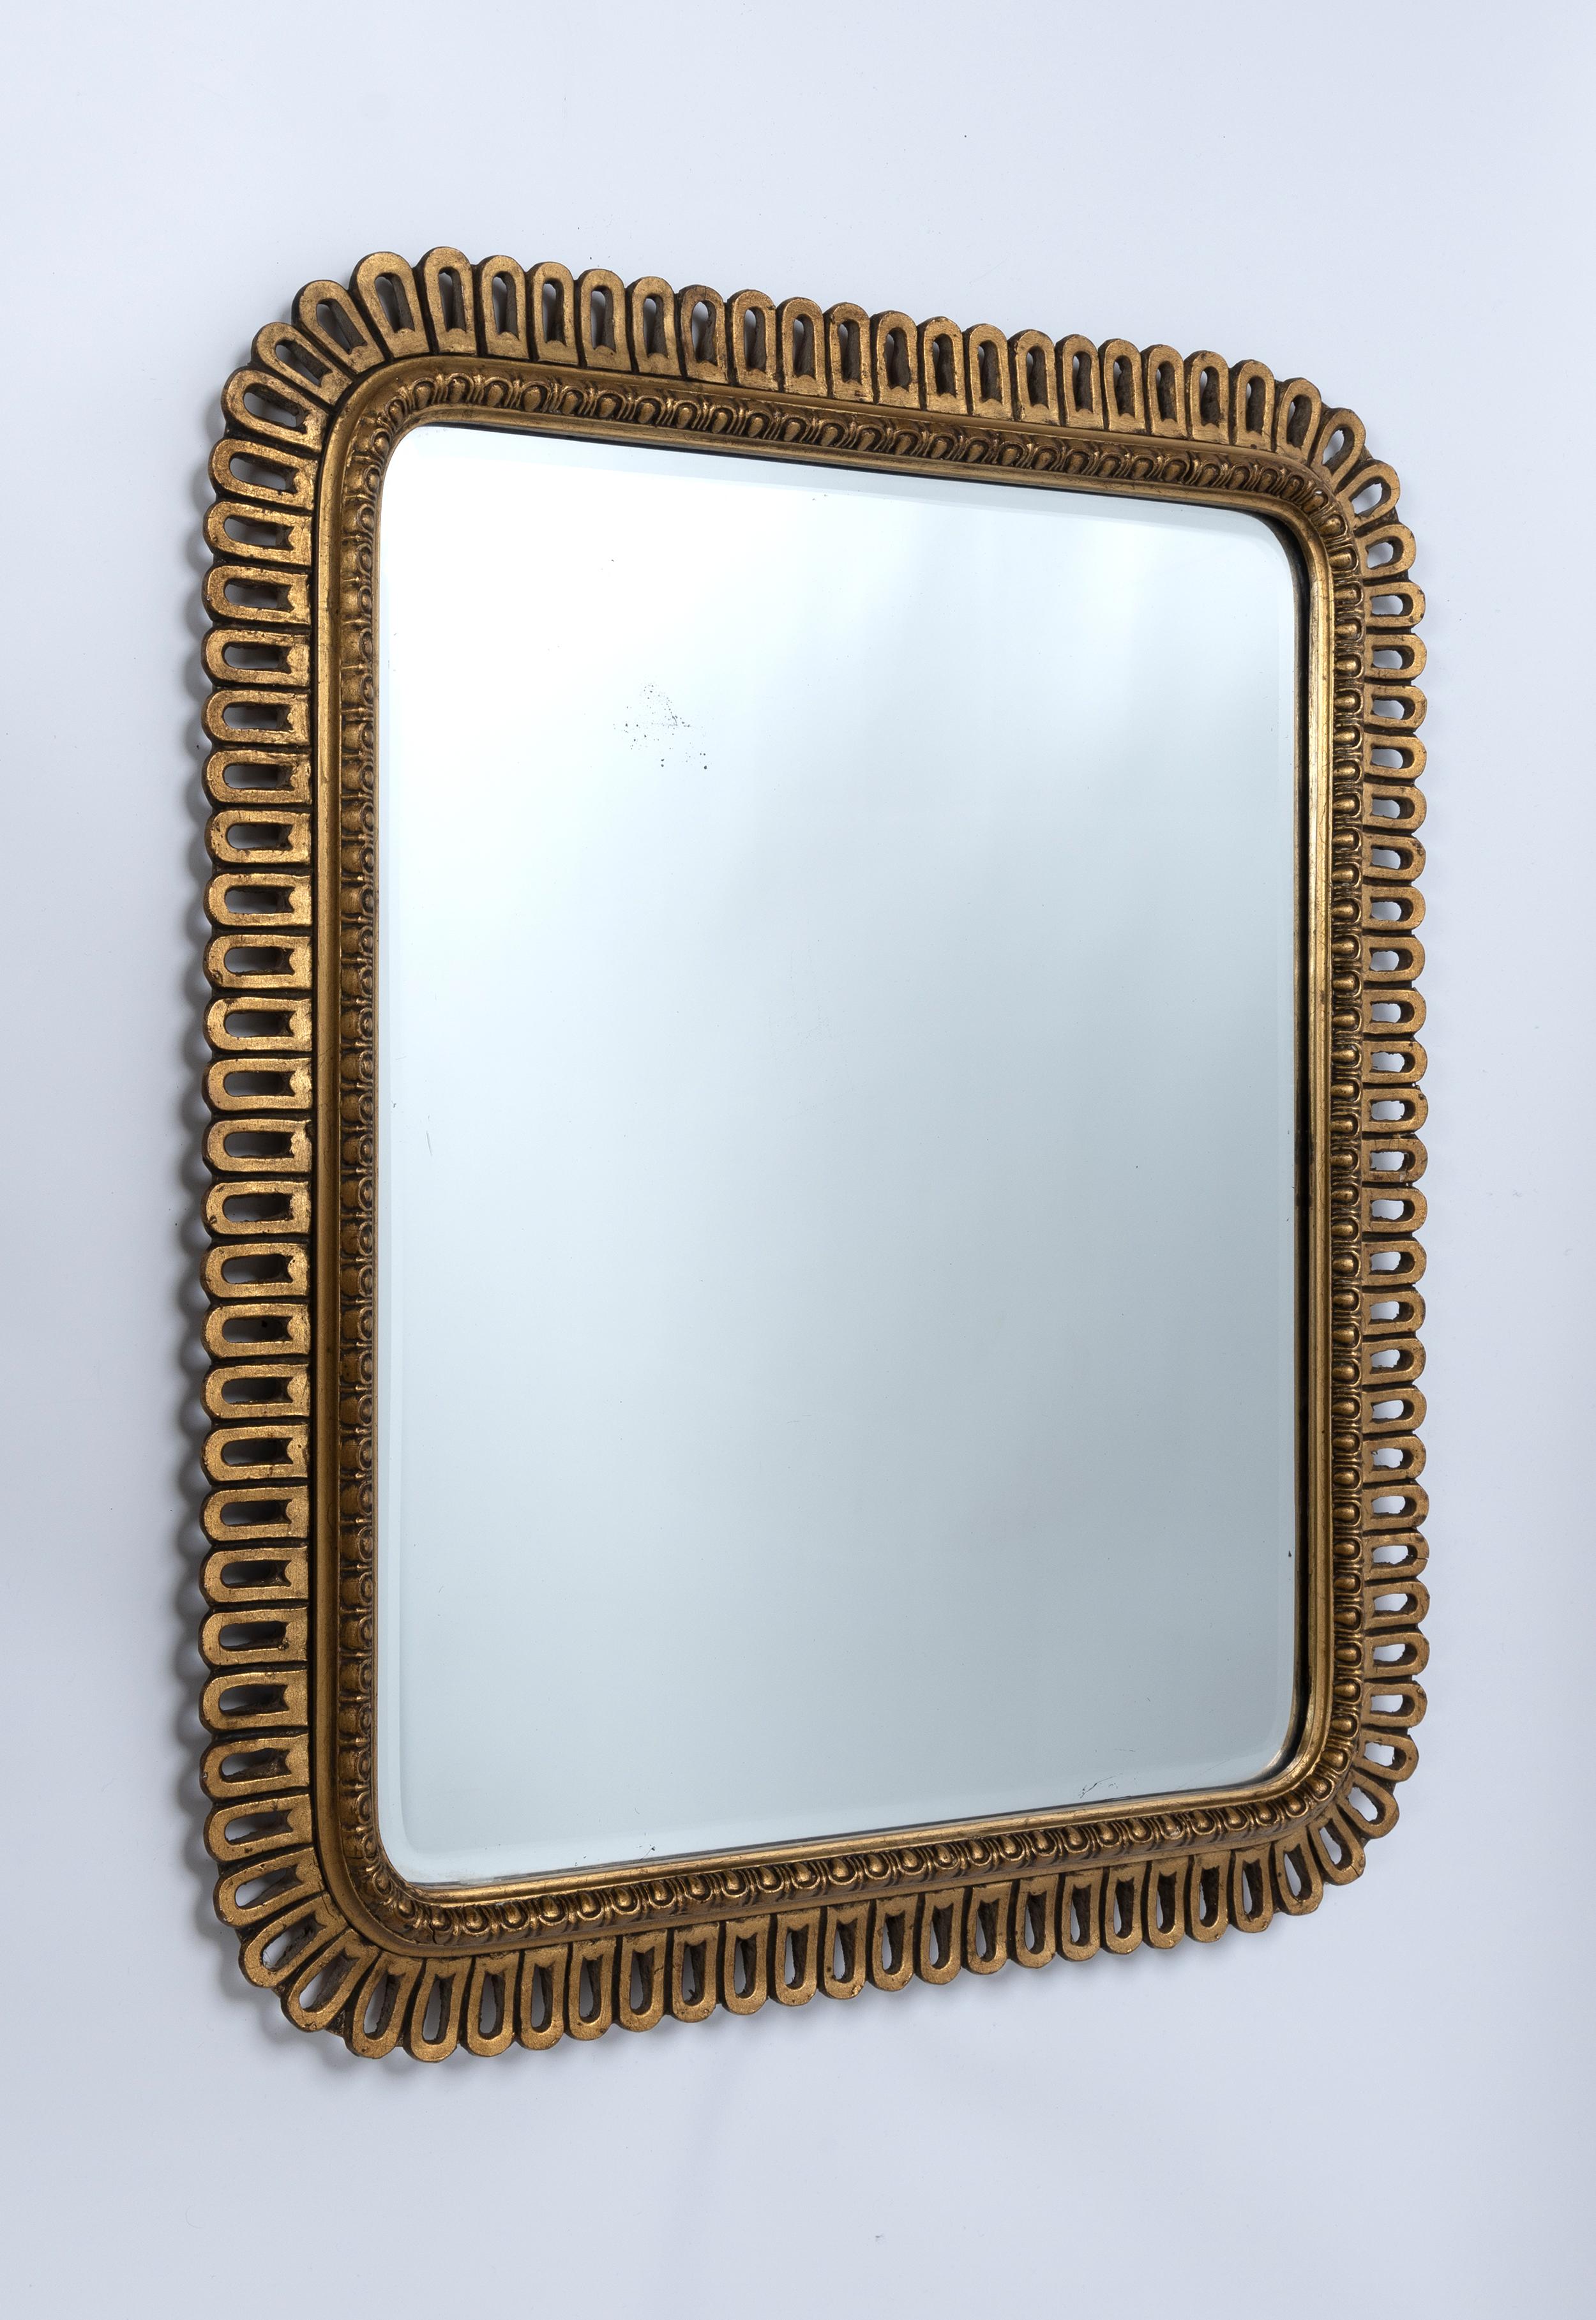 Mid Century Italian Gilt Scalloped Edge Rectangular Mirror C.1950
In very good condition commensurate of age. Minor foxing to mirror plate and minor wear to the gilt frame  (Please refer to photo).